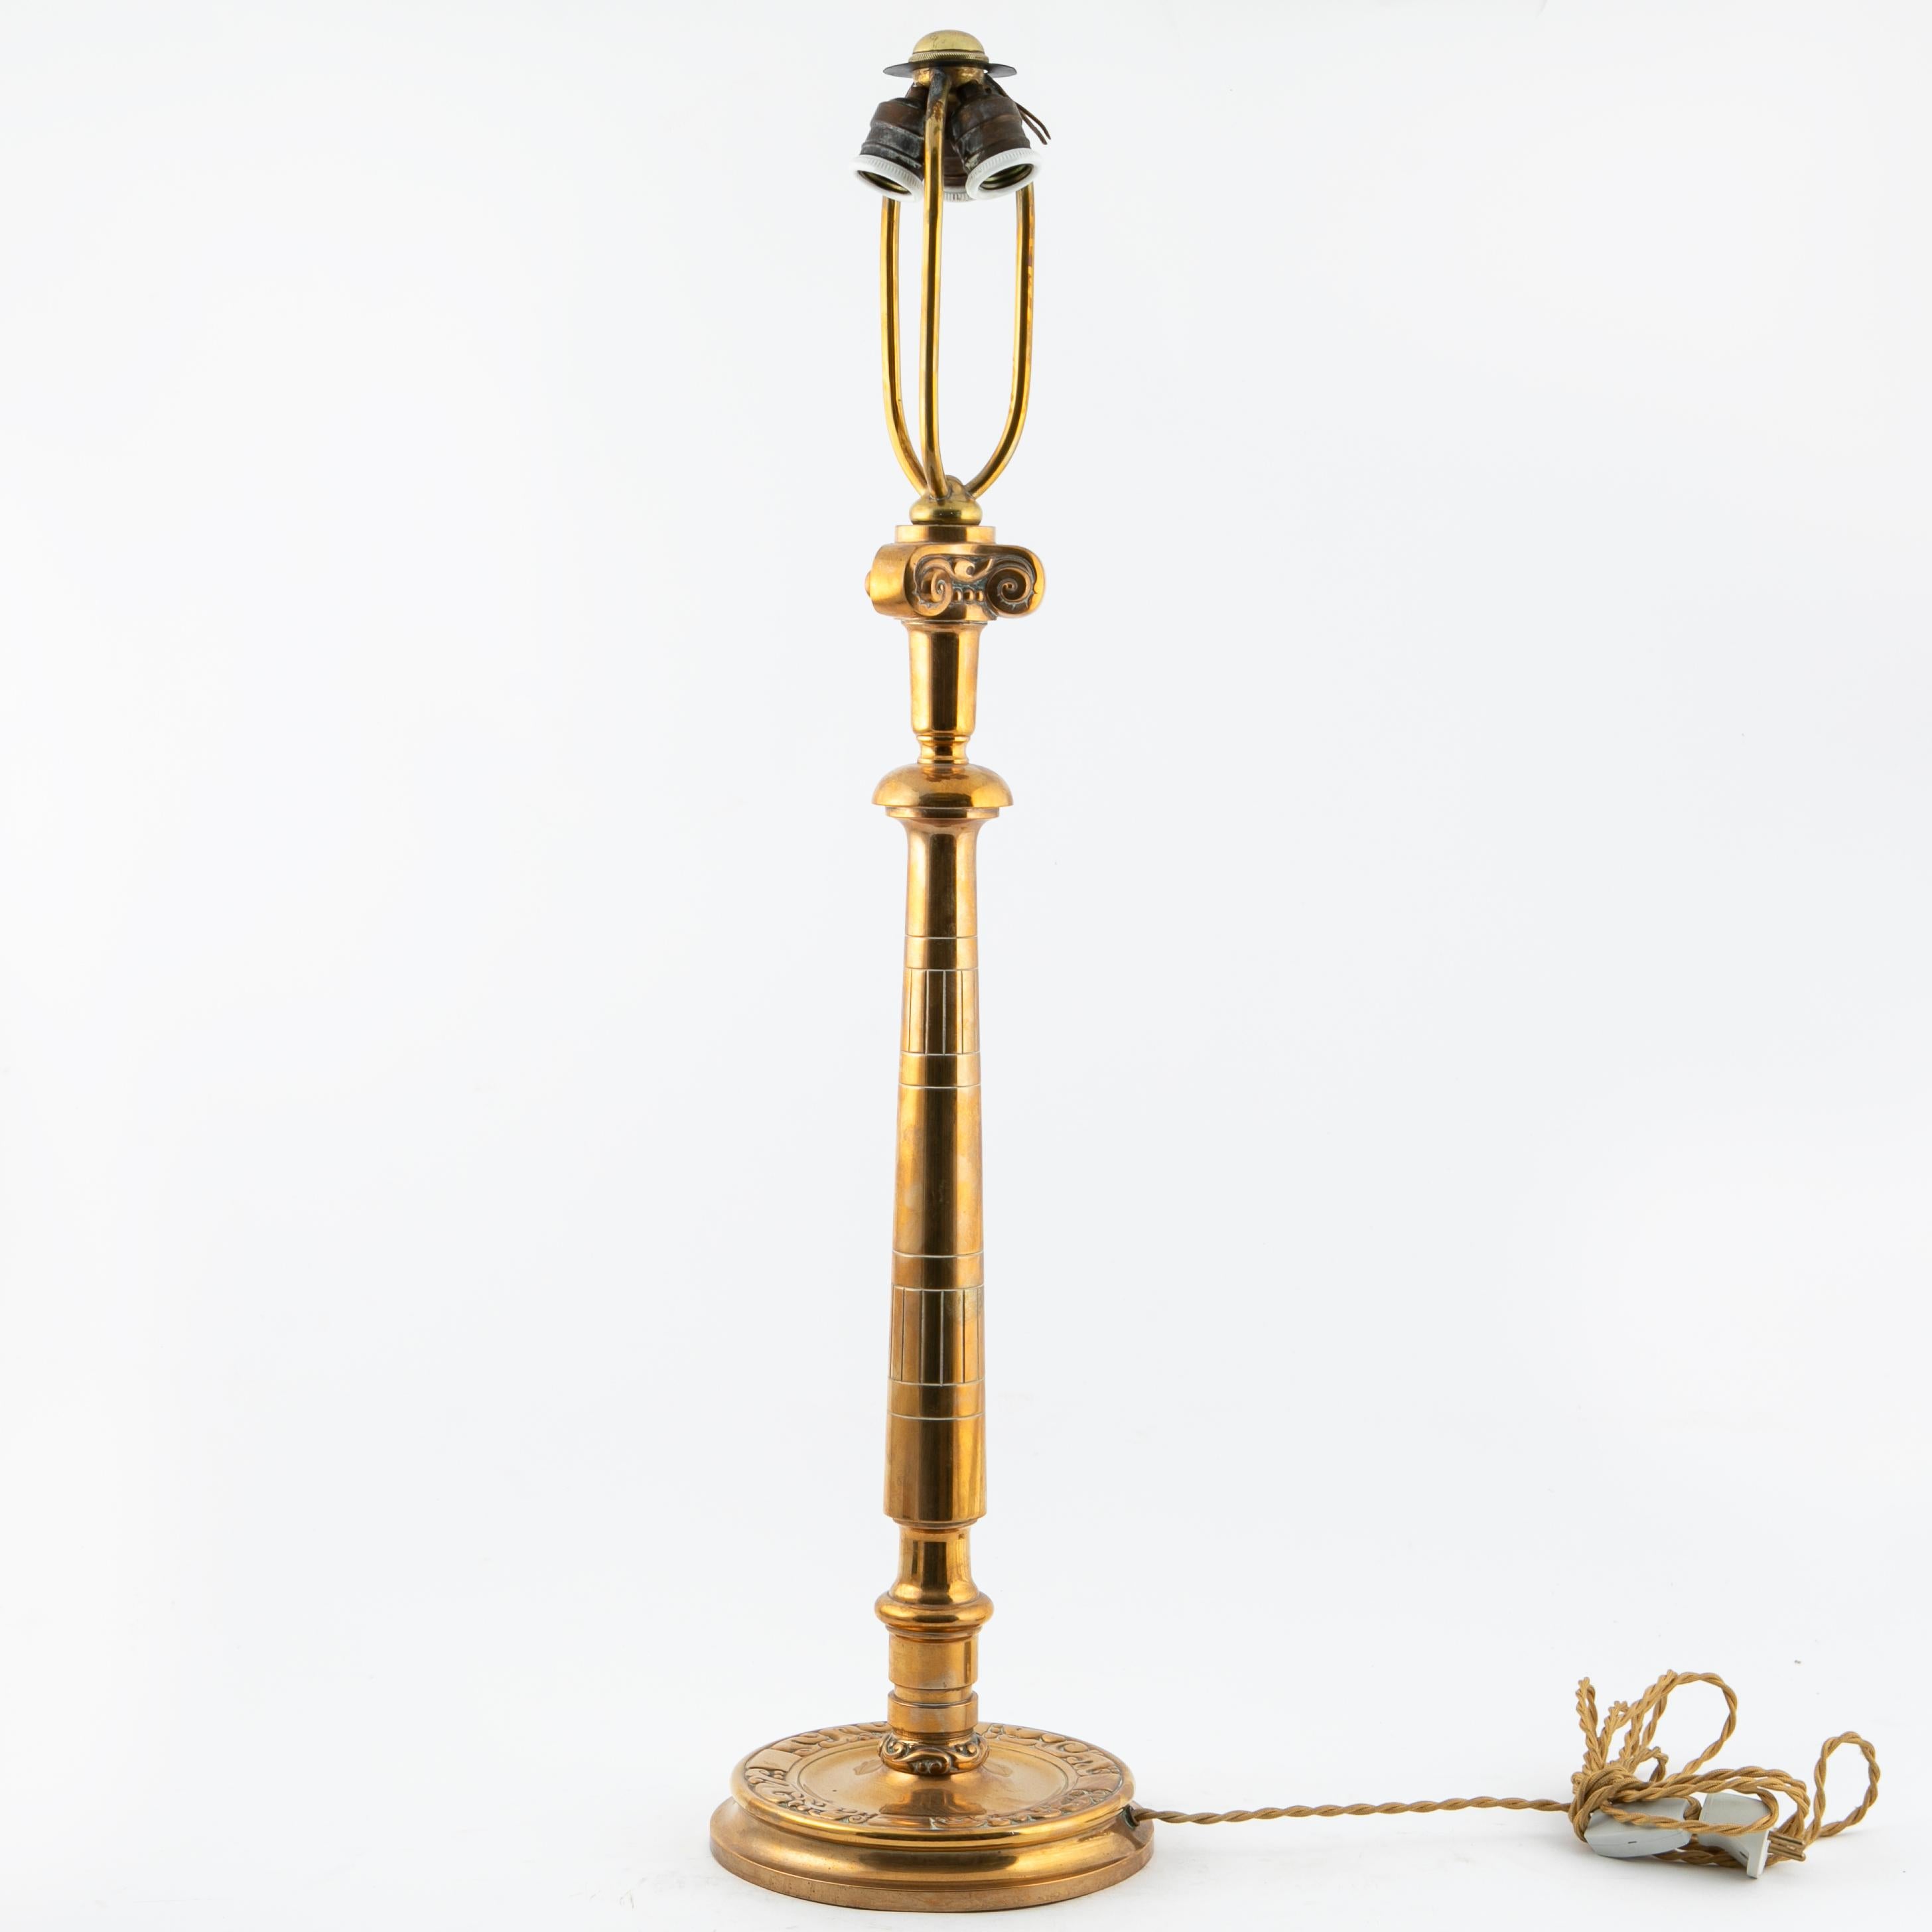 Danish Rare Large Art Nouveau Brass Table Lamp, Presumably by Thorvald Bindesbøll For Sale